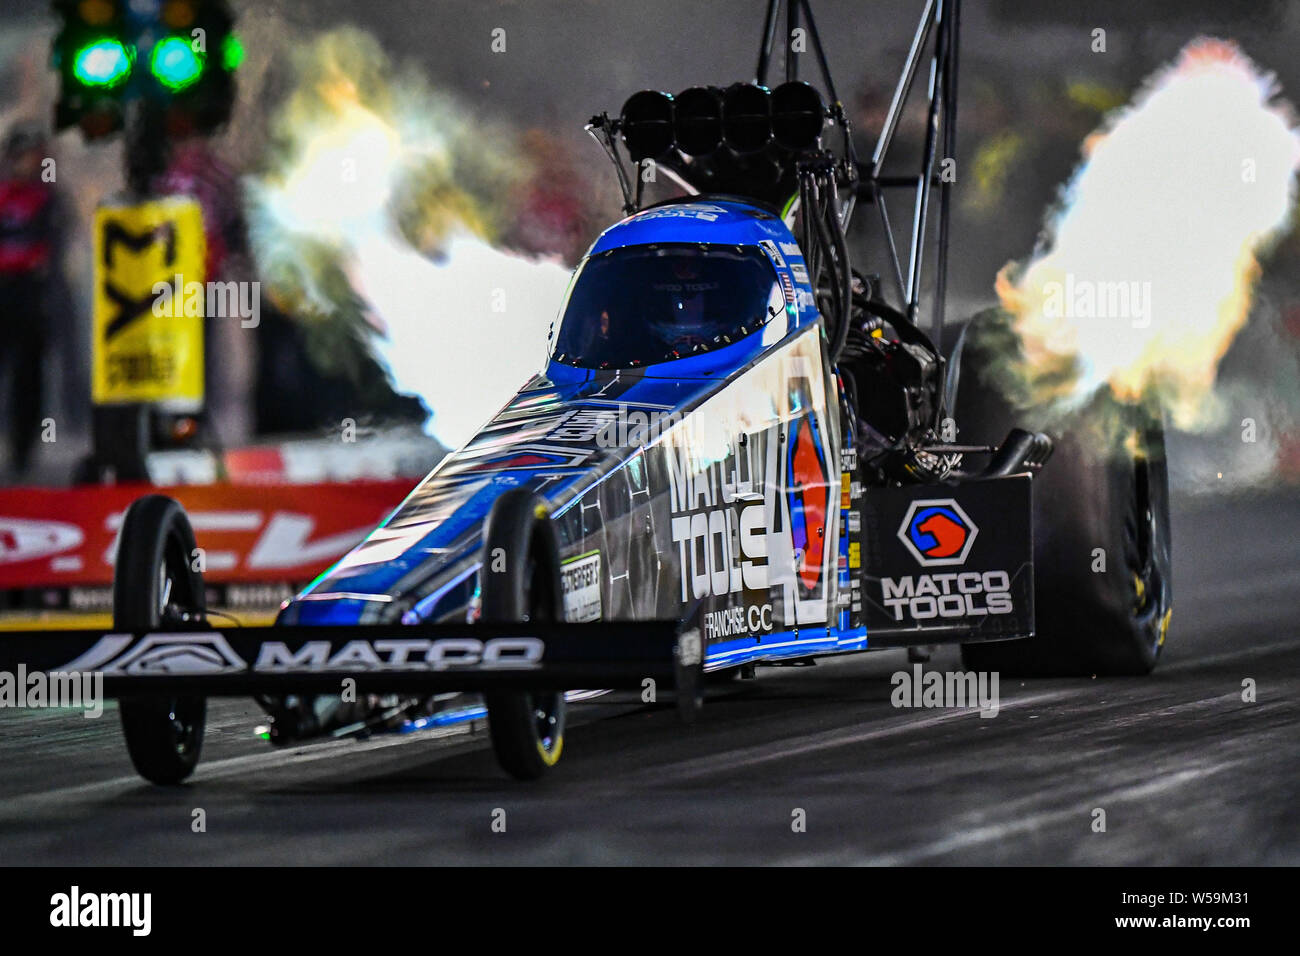 Sonoma, California, USA. 26th July, 2019. Antron Brown trickles the tires and lights the fires starting his Match Tools top fuel dragster during the NHRA Sonoma Nationals at Sonoma Raceway in Sonoma, California. Chris Brown/CSM/Alamy Live News Stock Photo